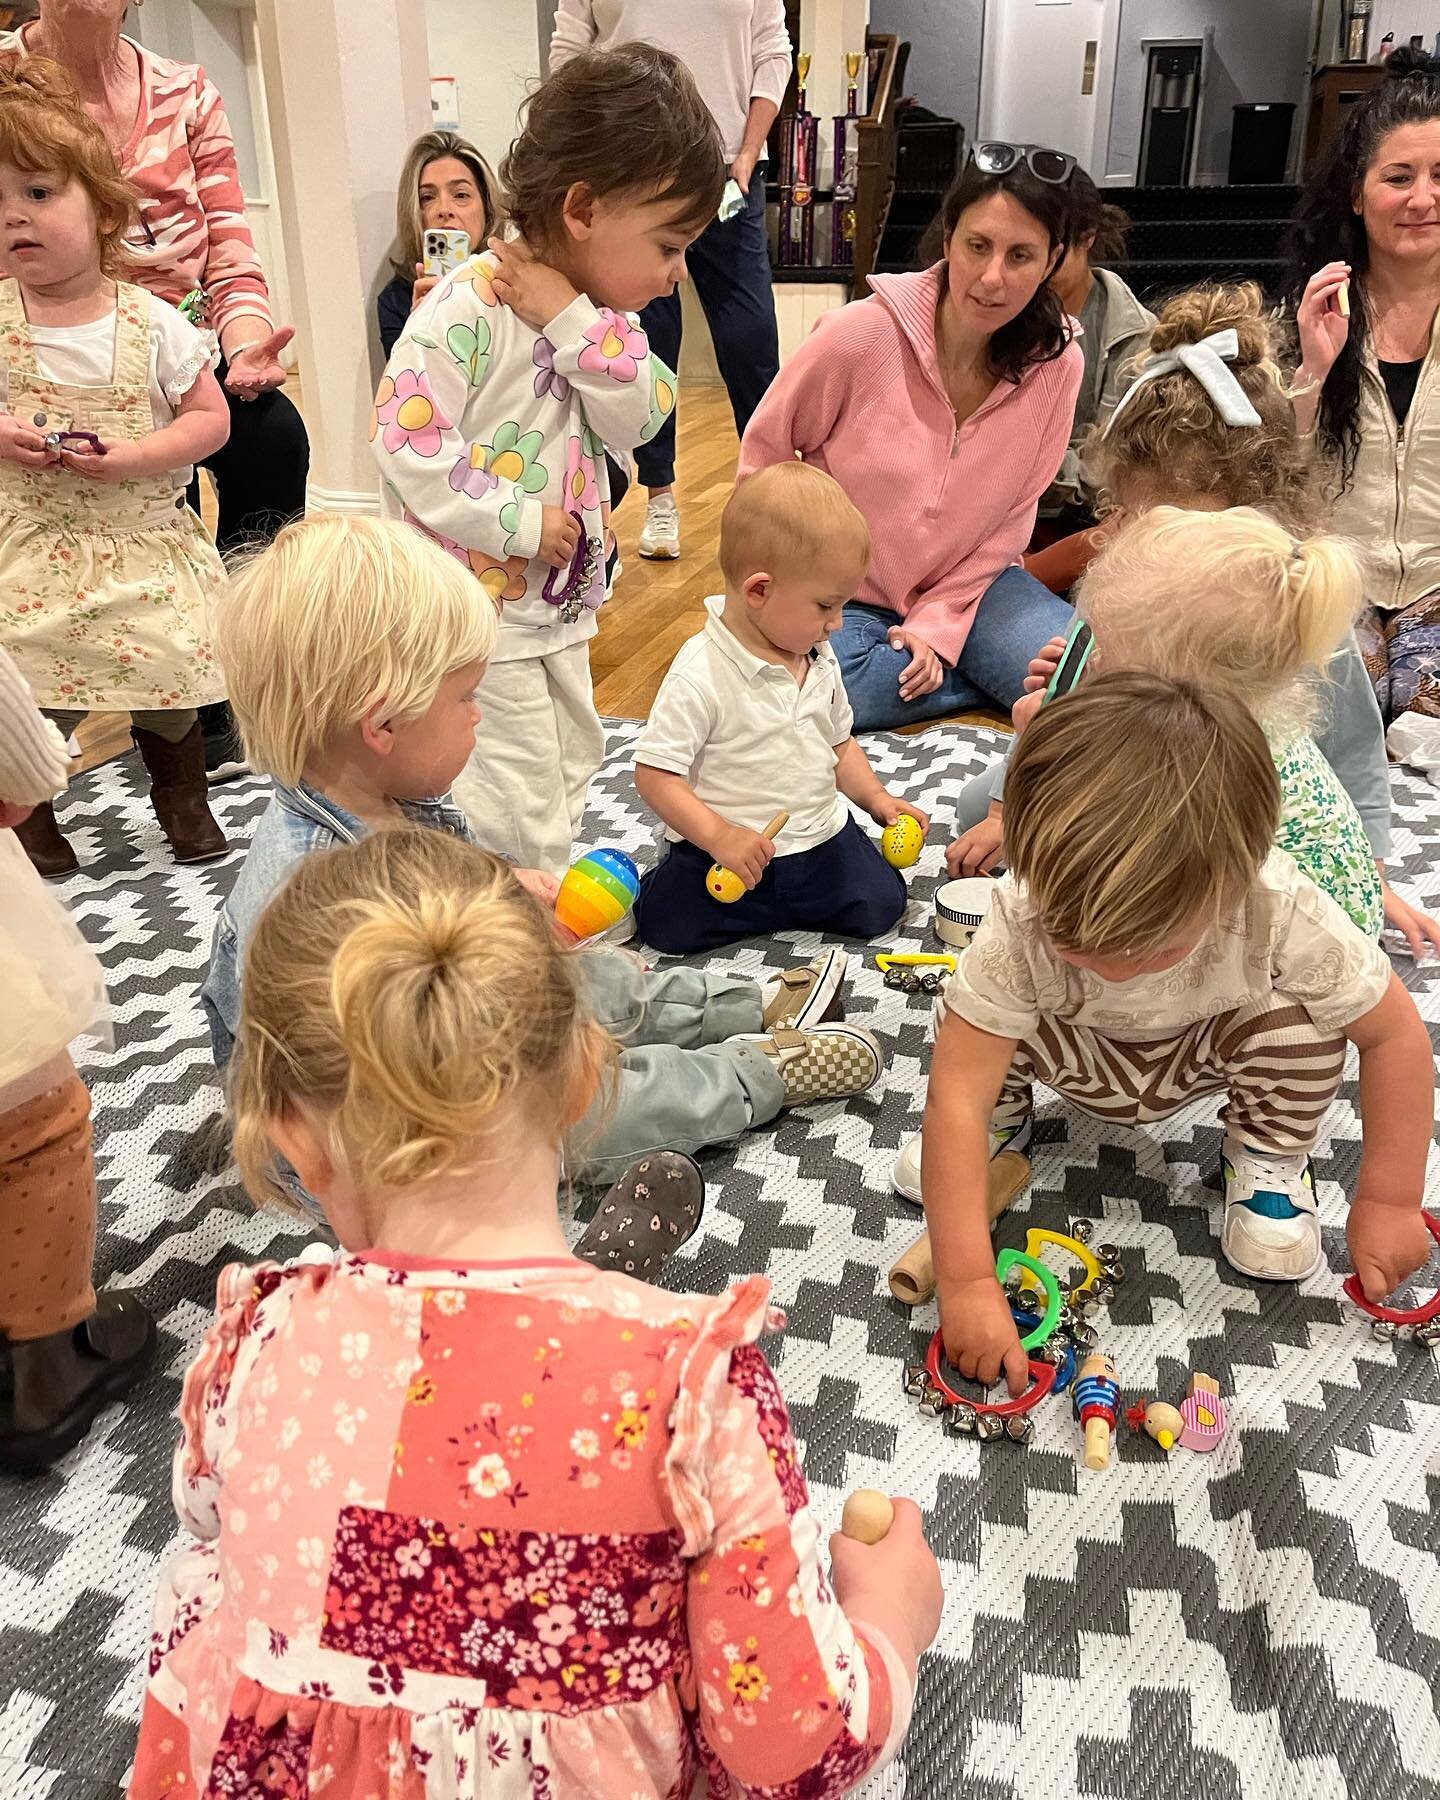 Our crew at the #springlakelibrary is always great, we had a fabulous time this morning with our #lakehouselollies . Come and see us in #asburypark next week! #toddlermusicclass #cincodemayo  #littlemusician